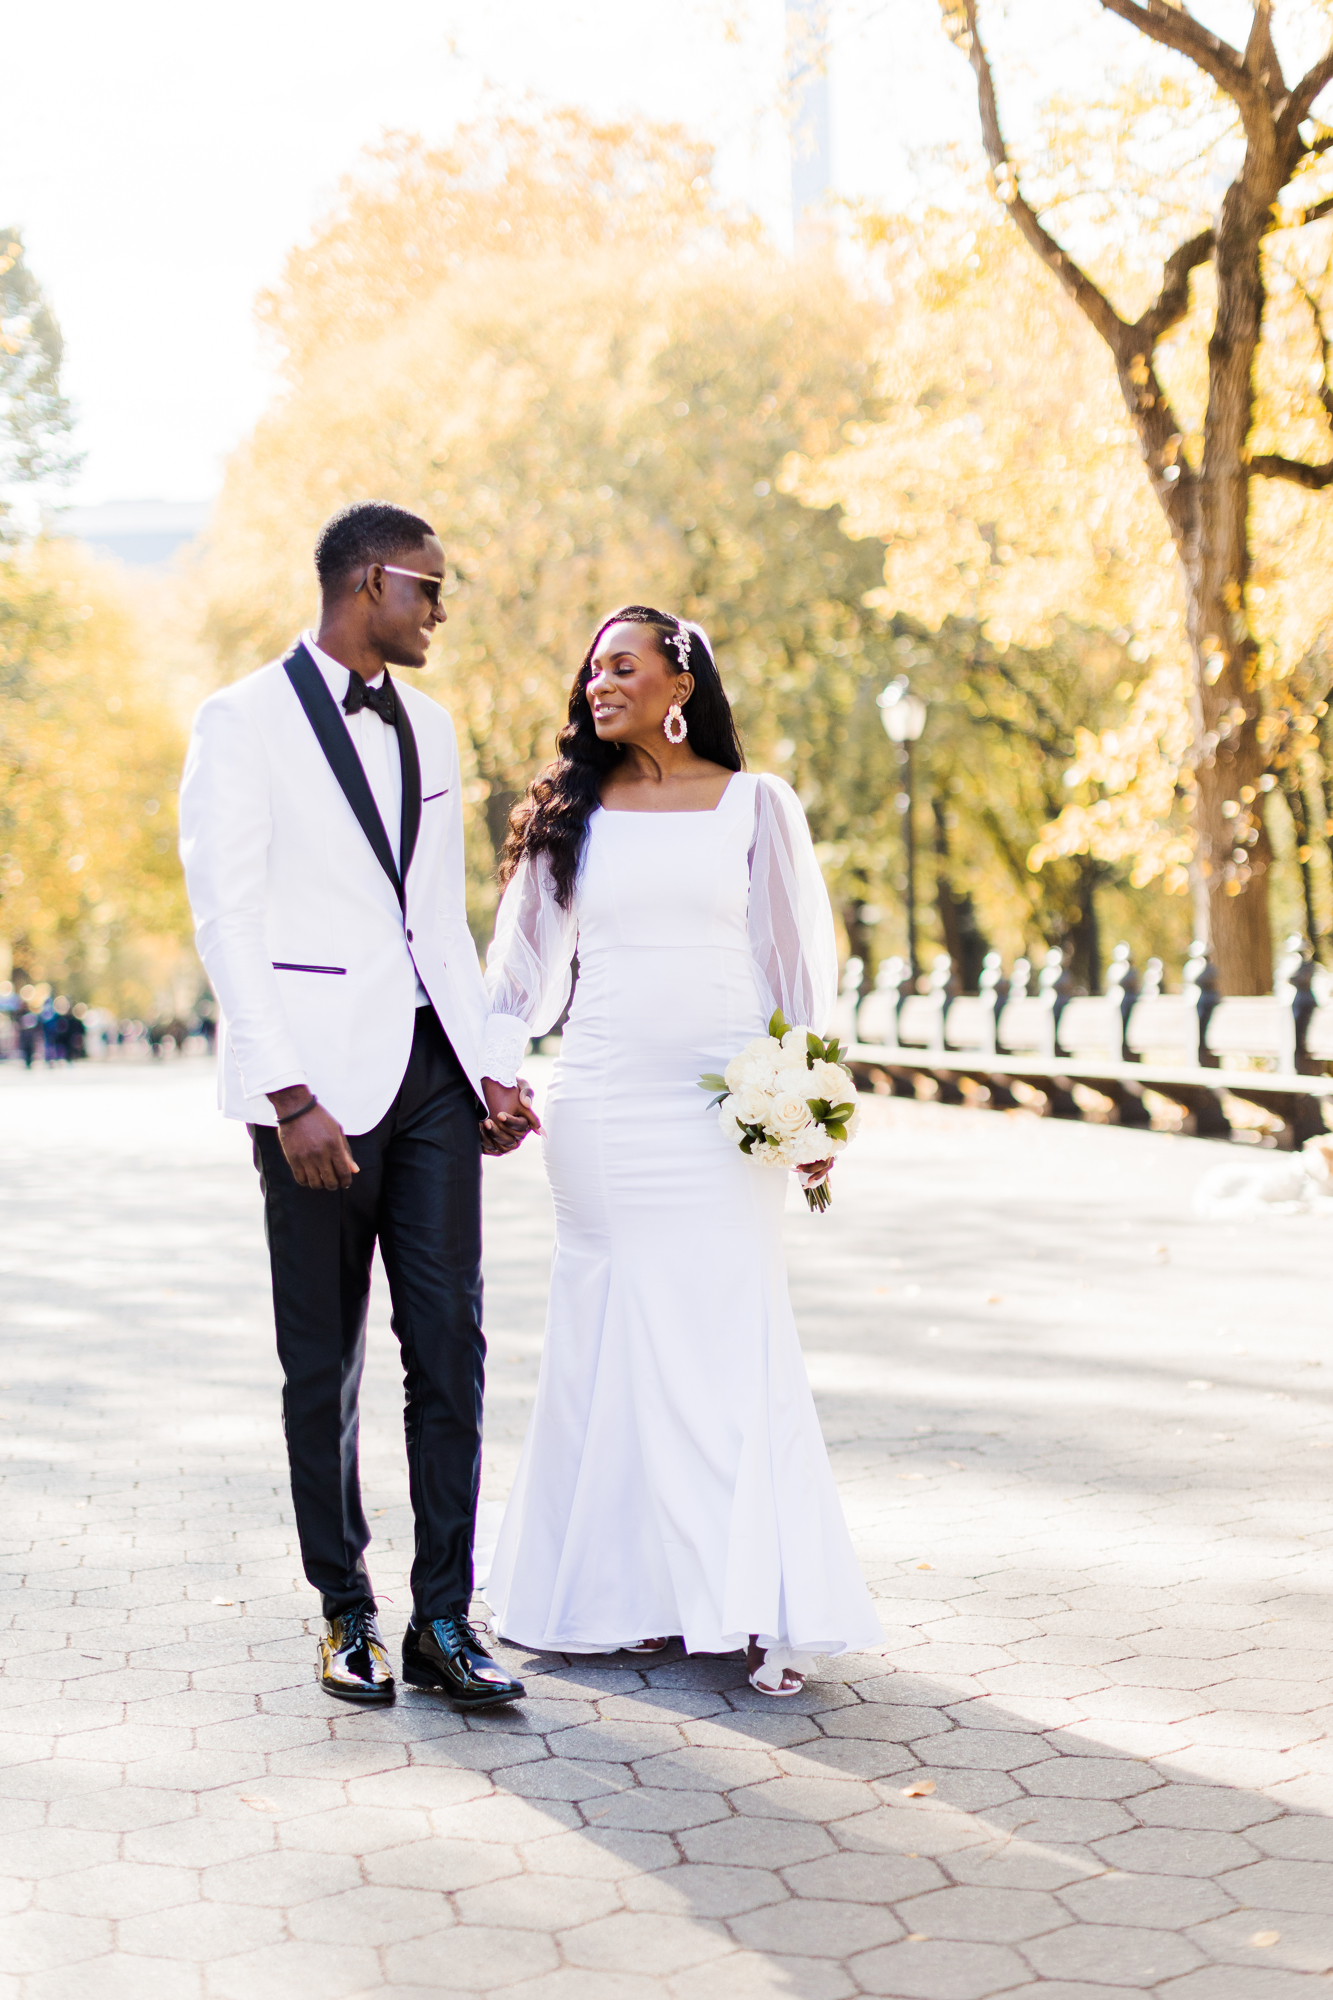 Special Central Park Wedding Photos on Cherry Hill in Fall